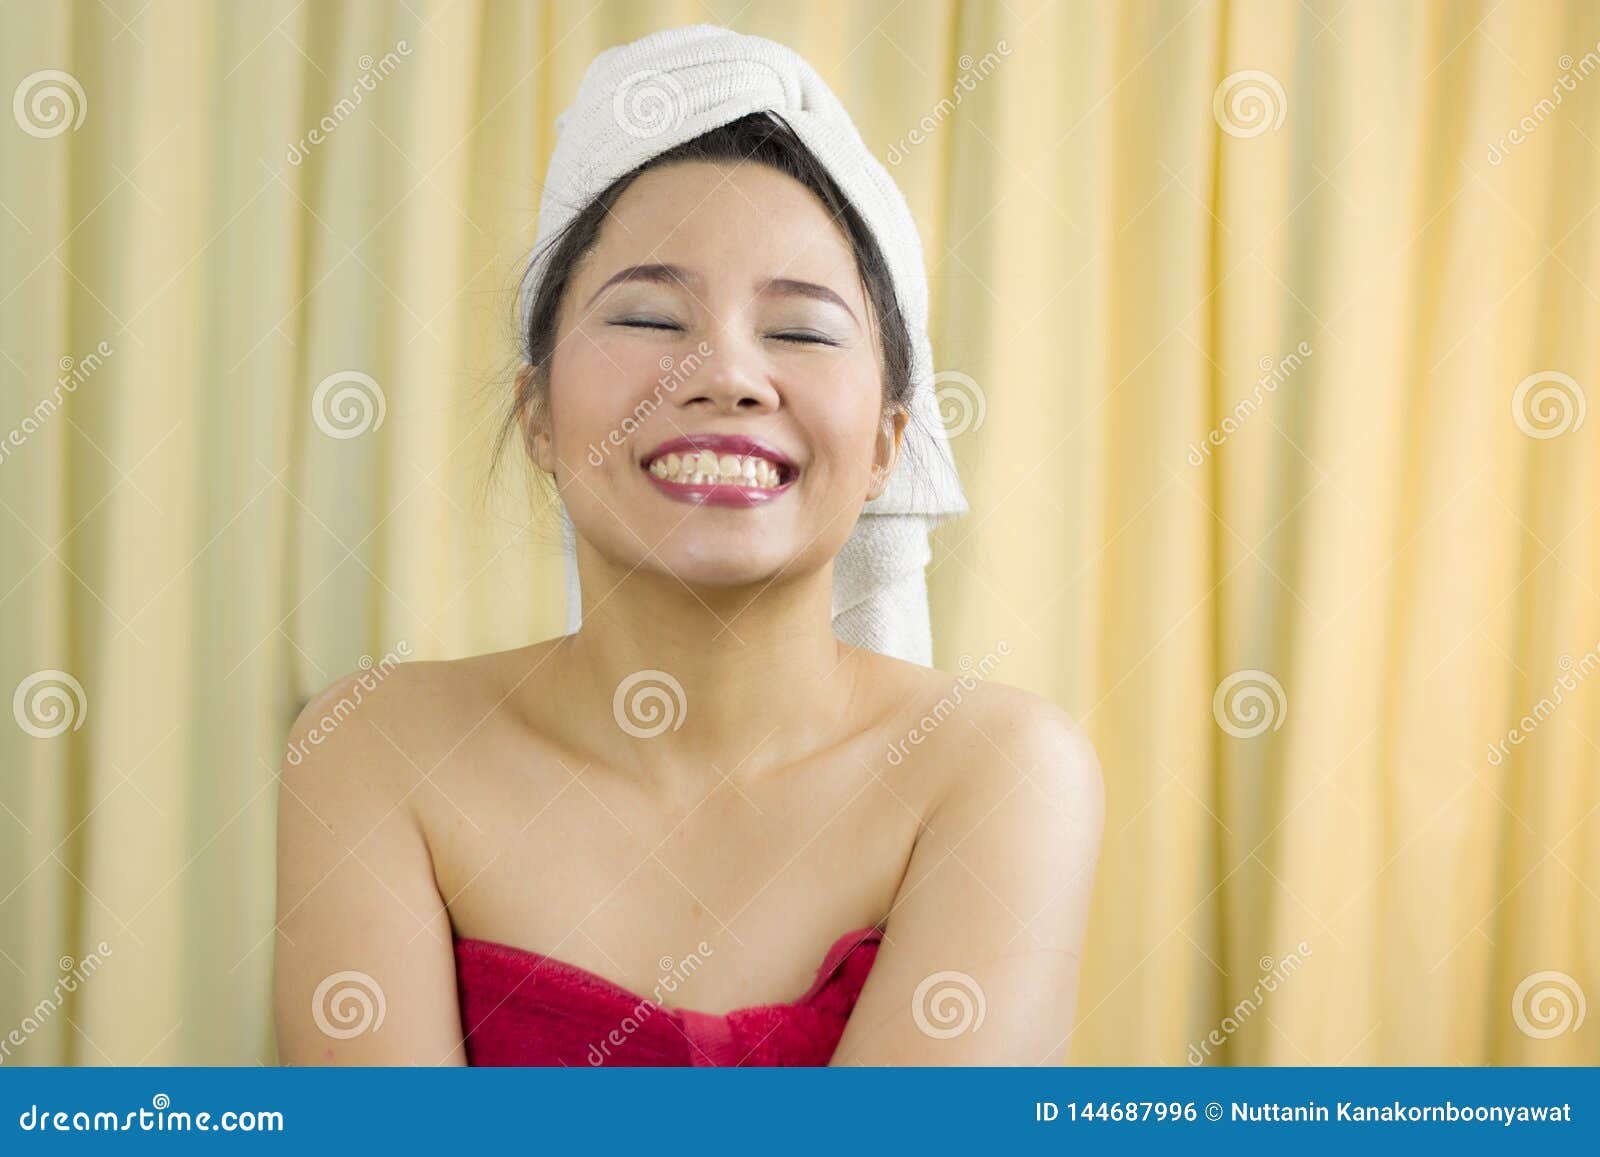 Asian Woman Wear a Skirt To Cover Her Breast after Wash Hair, Wrapped in  Towels after Shower Stock Photo - Image of lady, cover: 144687996